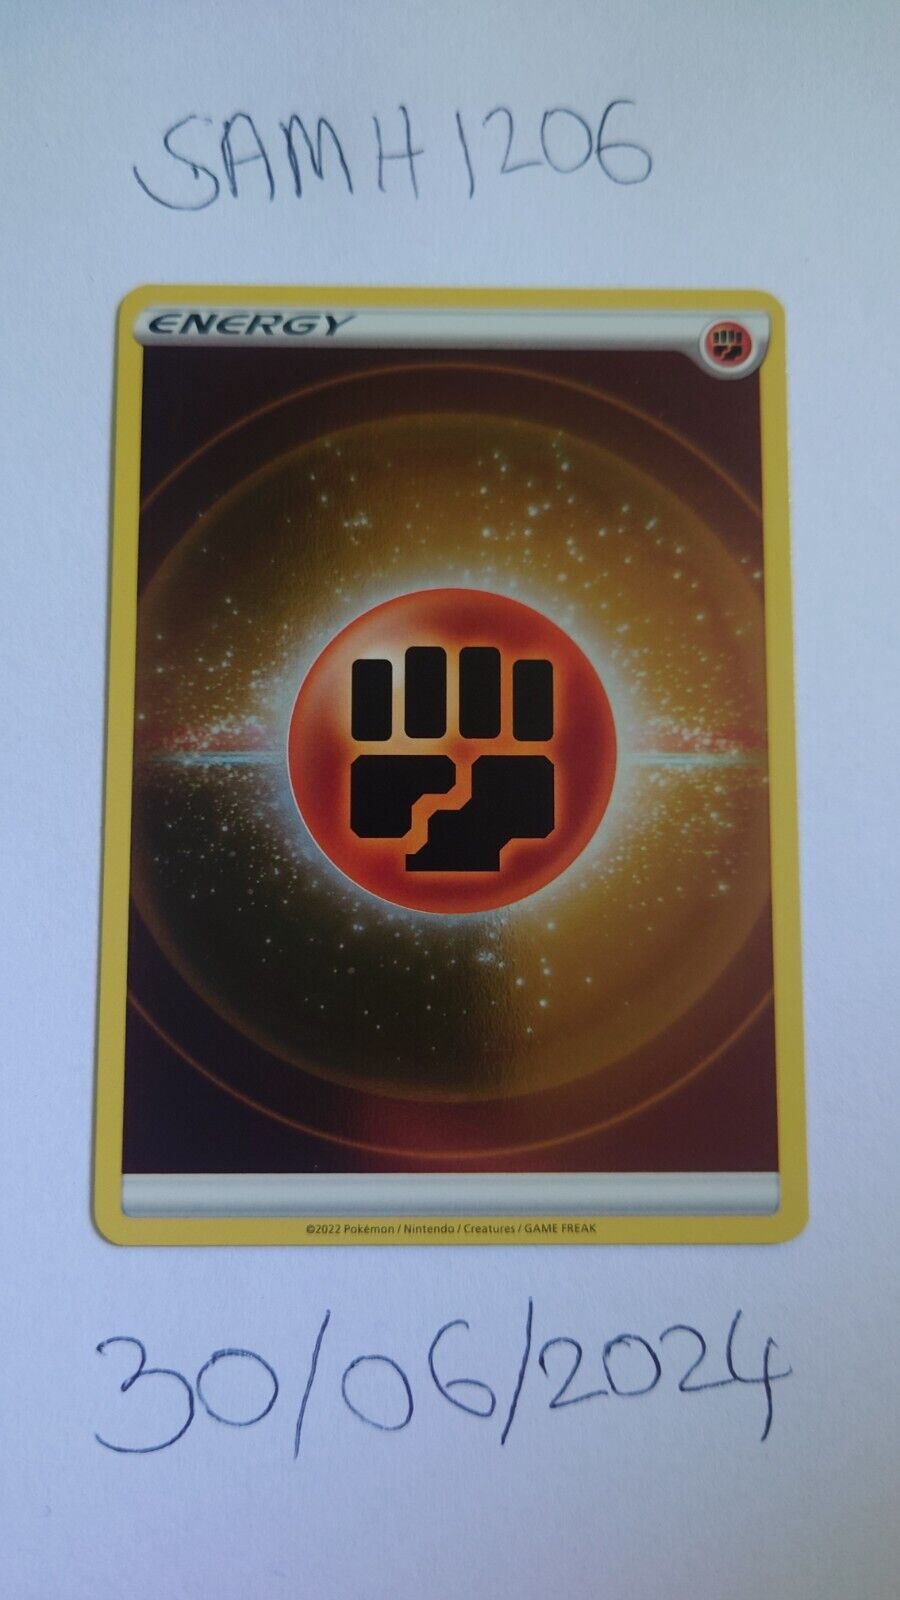 Pokémon TCG Card - Crown Zenith - Fighting Energy - Reverse Holo - Non Stamped